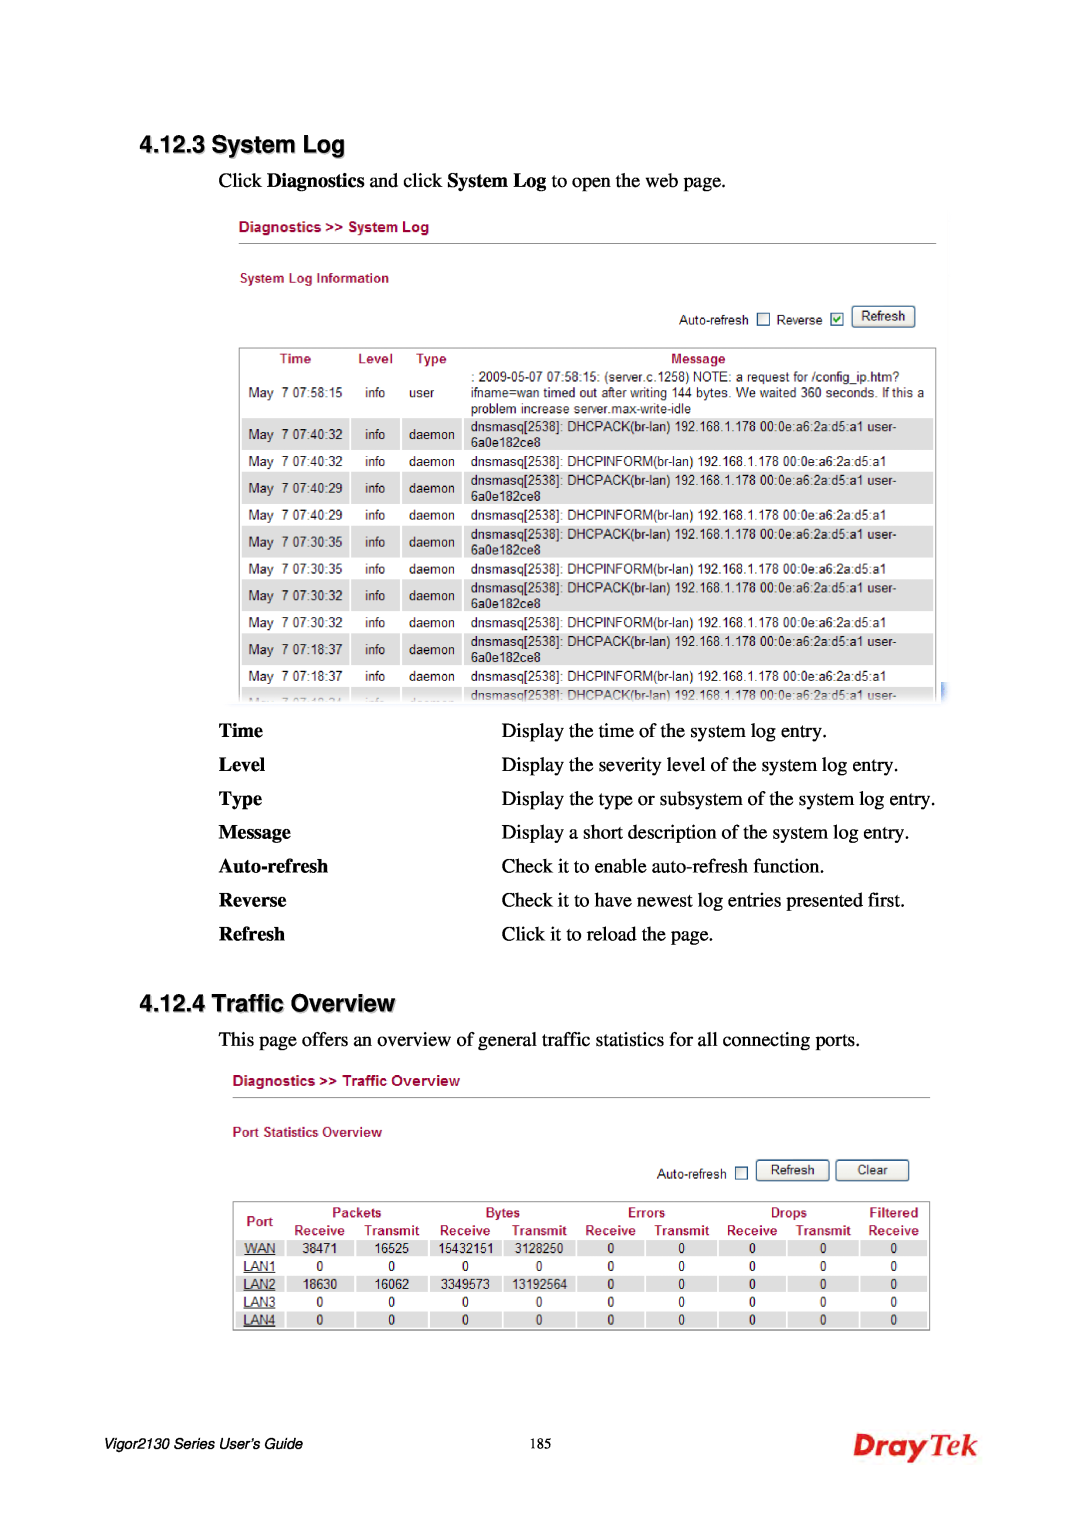 Draytek 2130 manual System Log, Traffic Overview, Time, Level, Type, Message, Auto-refresh, Reverse, Refresh 